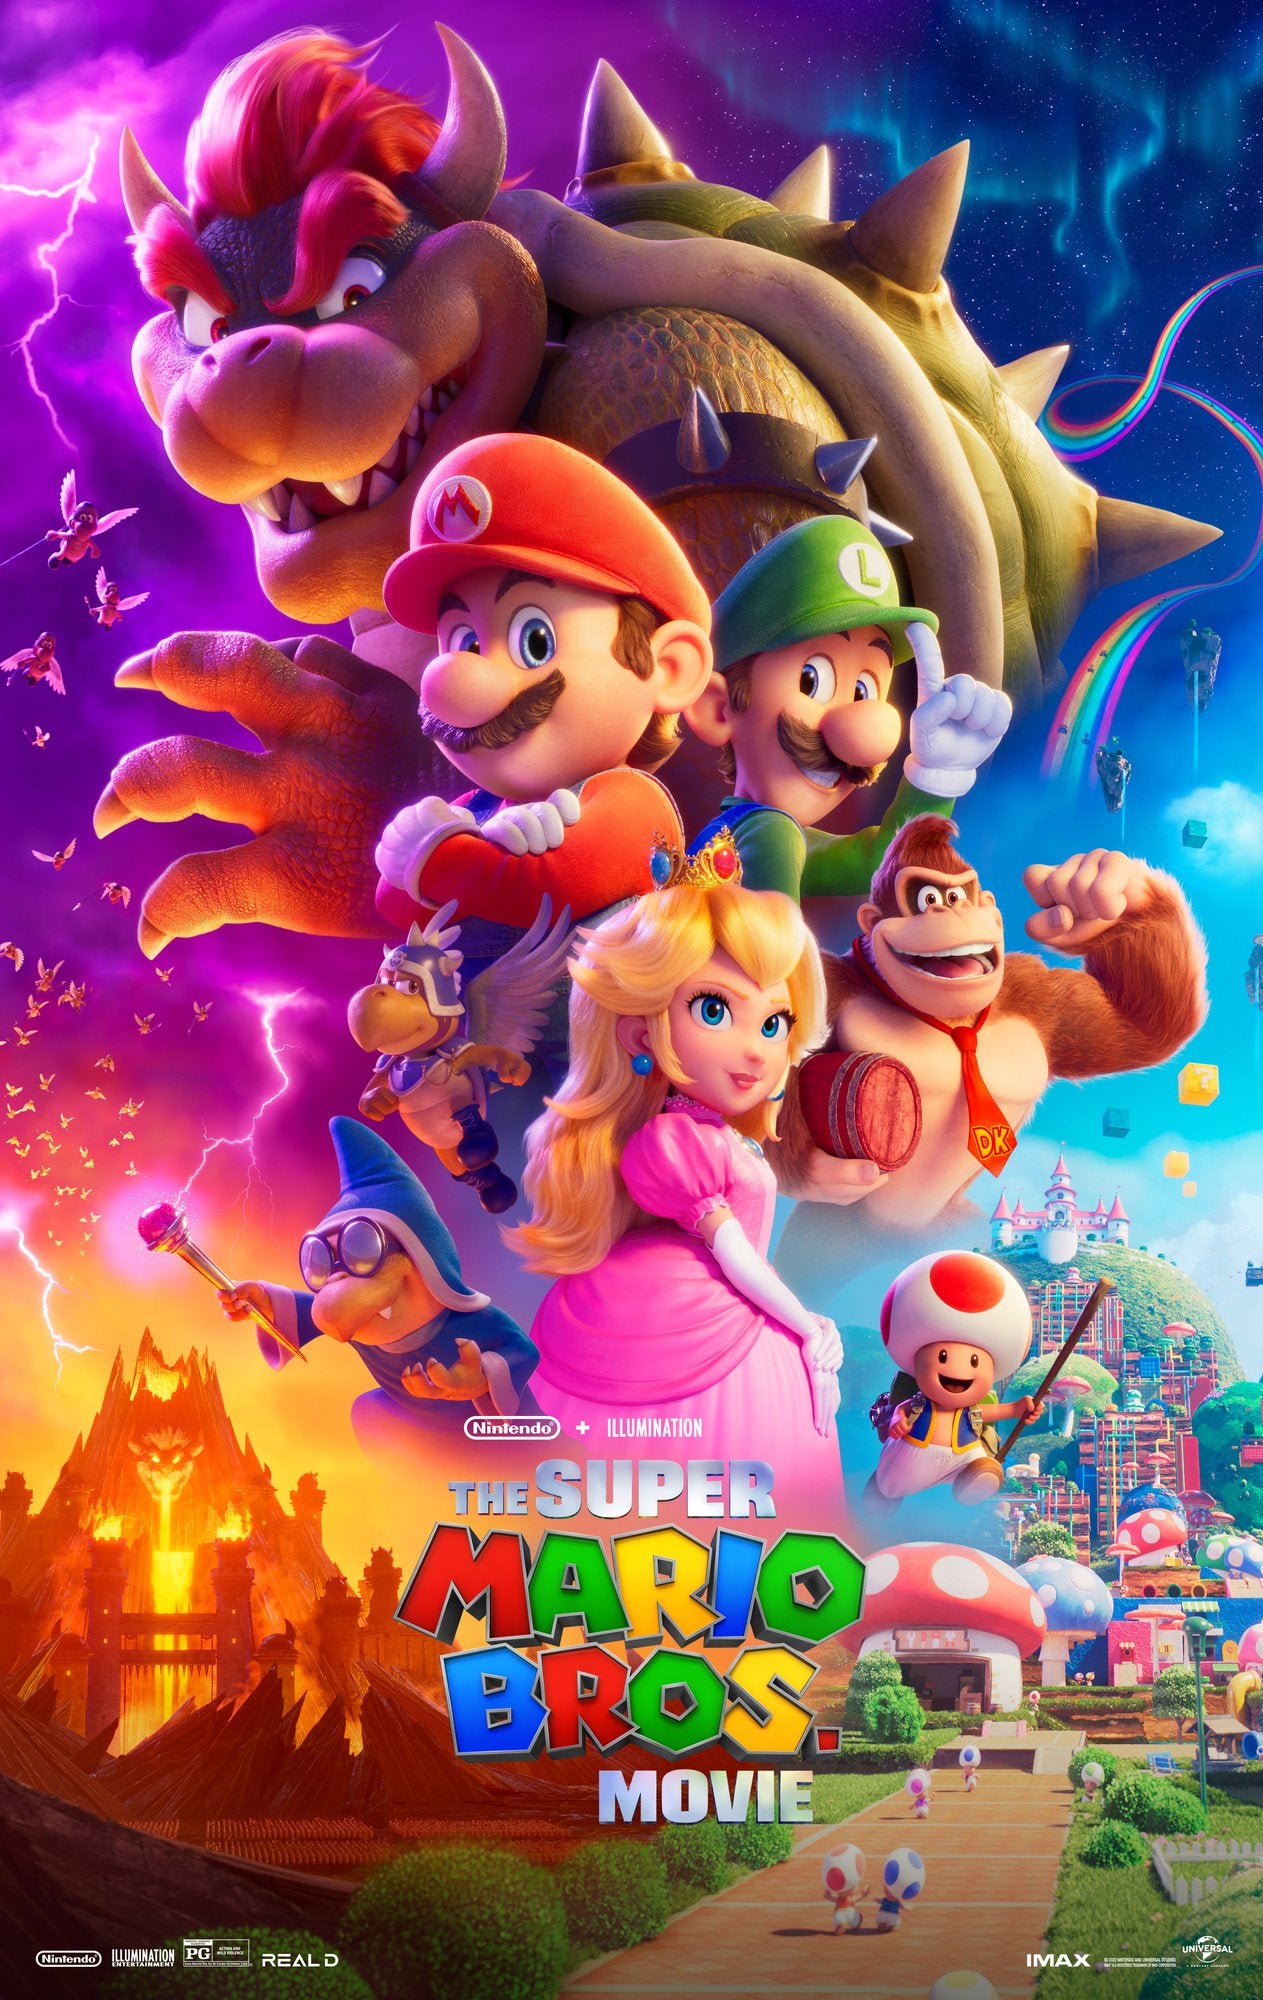 The Super Mario Bros. Movie Poster Features All of Our Favorite Mushroom Kingdom Characters